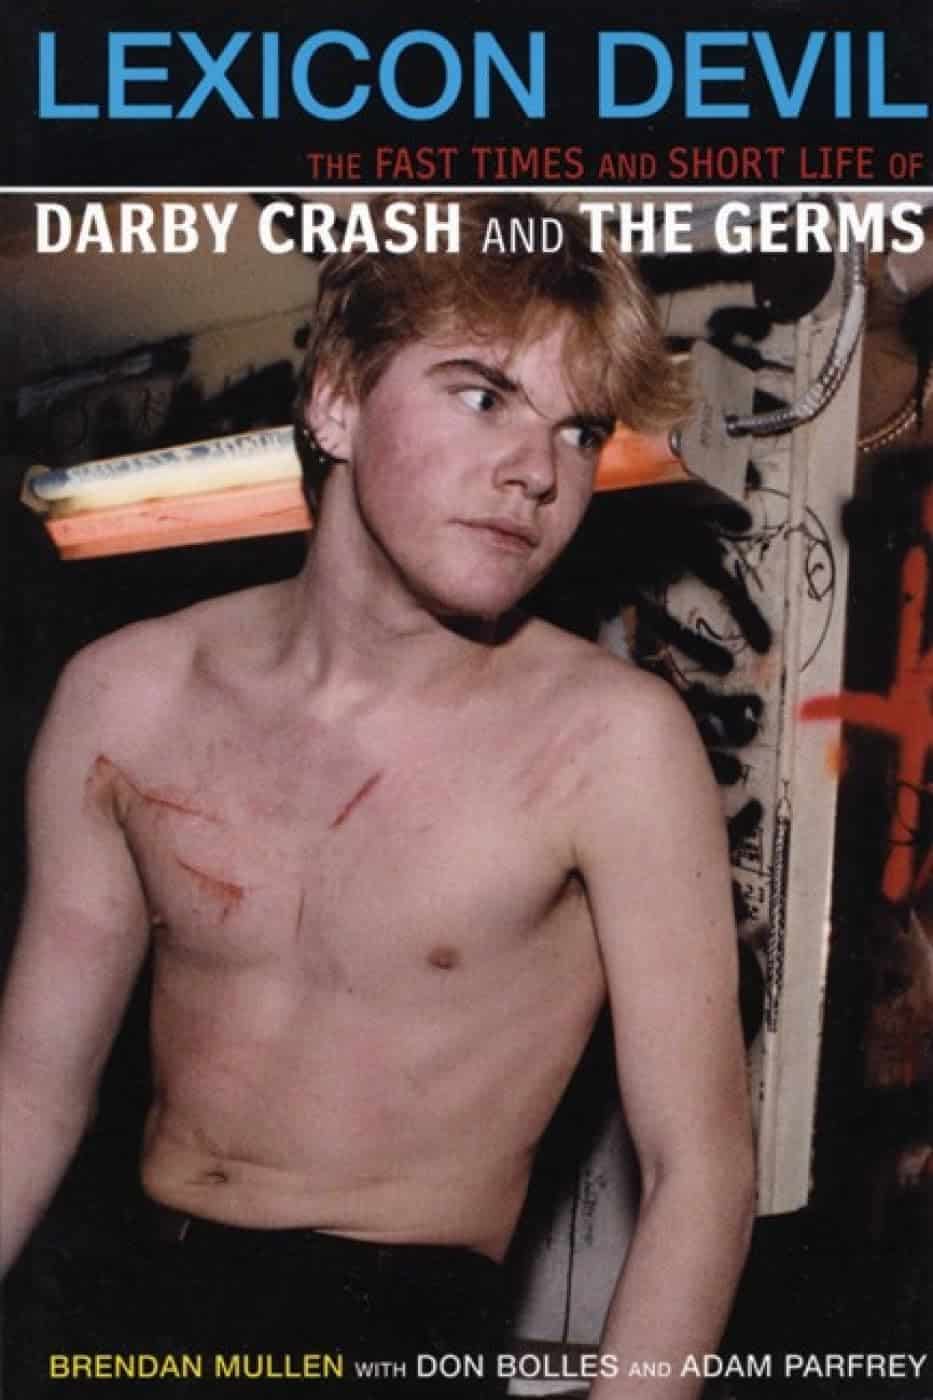 Lexicon Devil: The Fast Times and Short Life of Darby Crash and The Germs by Brendan Mullen